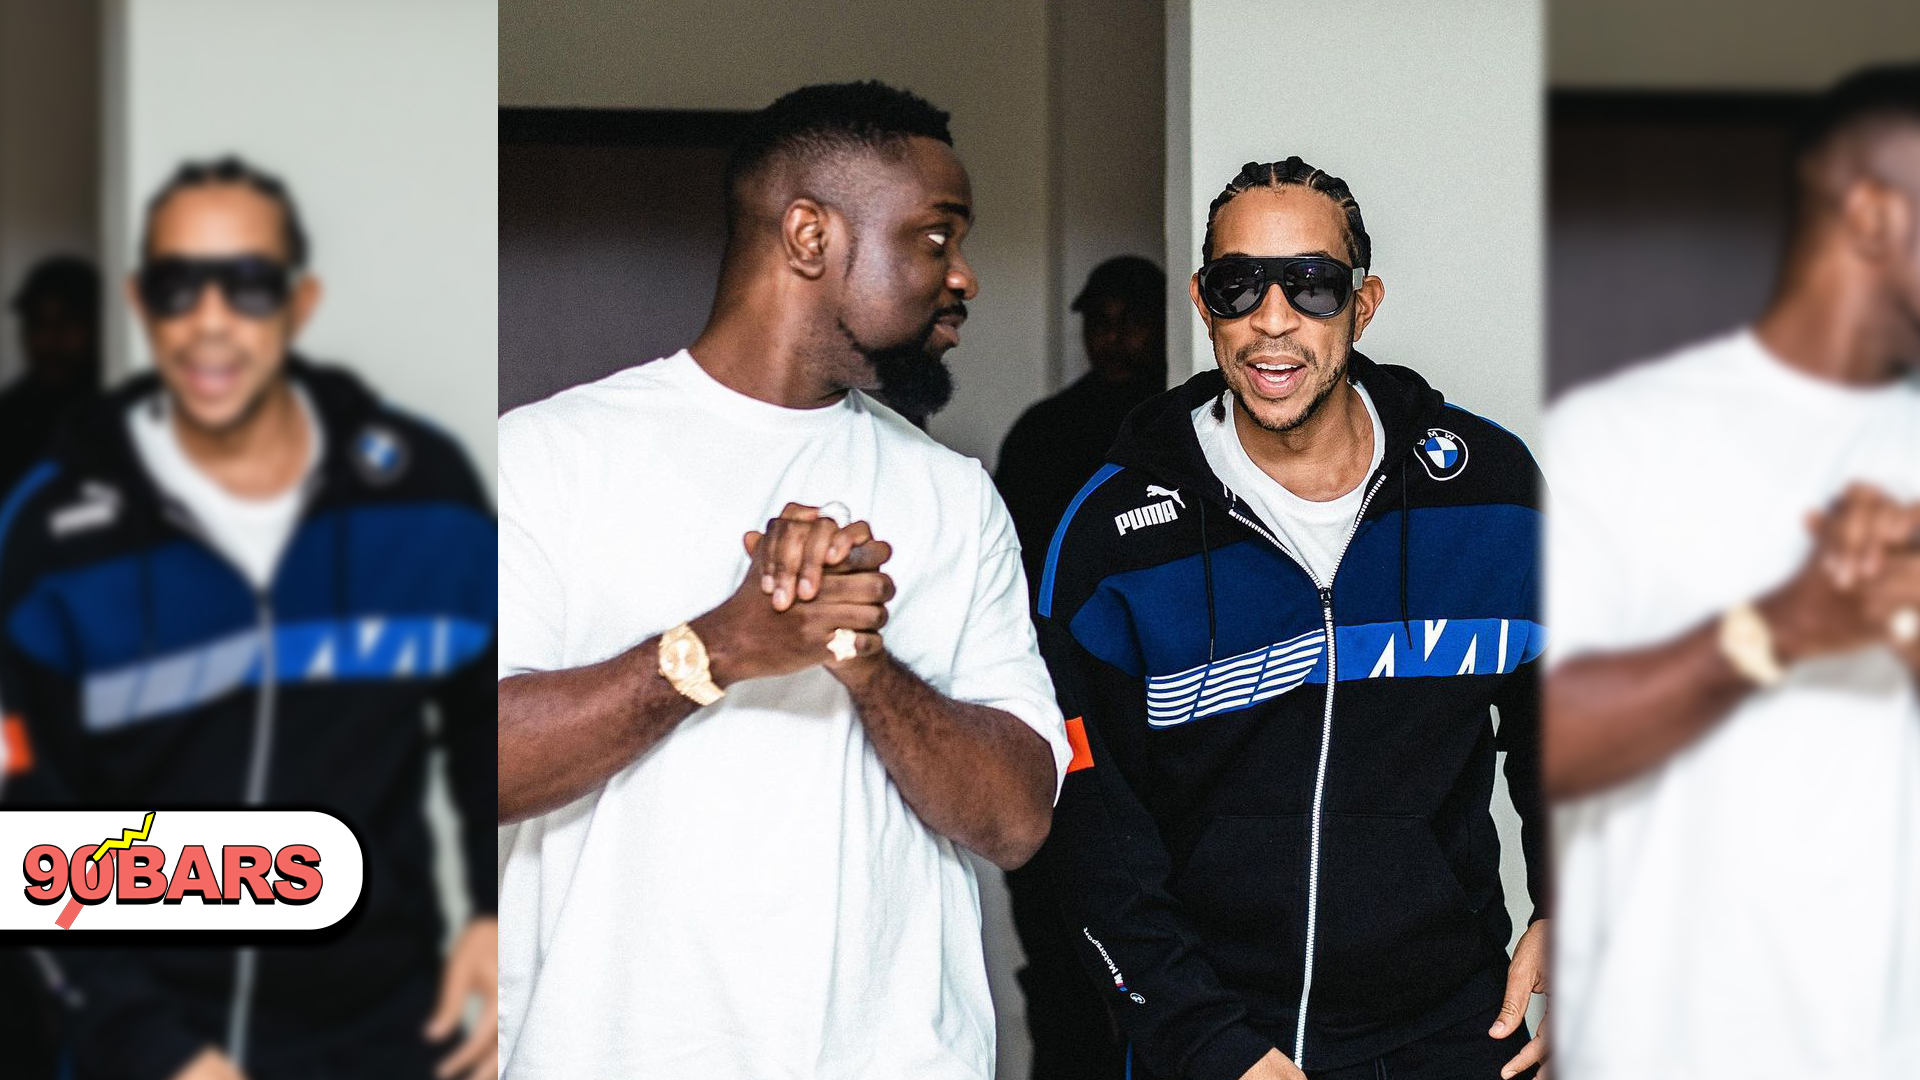 11 years after their initial meeting, Sarkodie and Ludacris get back together in the studio.